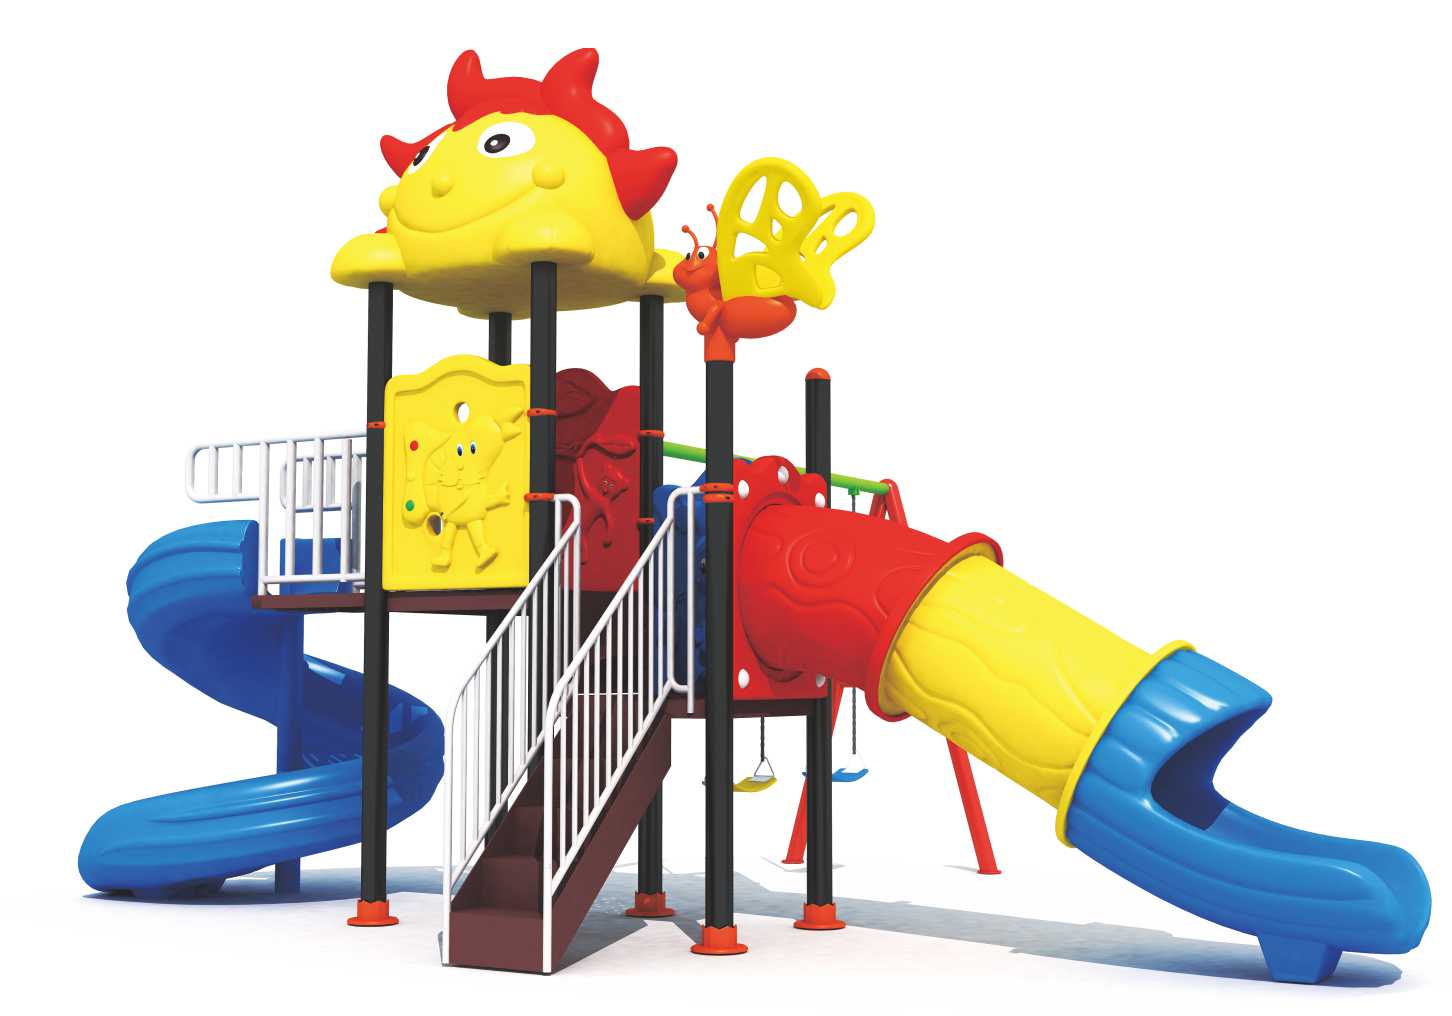 Rbwtoys Outdoor Play Toys Slide For Kids And Swing For Kids Playground Toys High Quality For Kids Activities Set Model No. RW-12042 Size 570&times;470&times;330cm